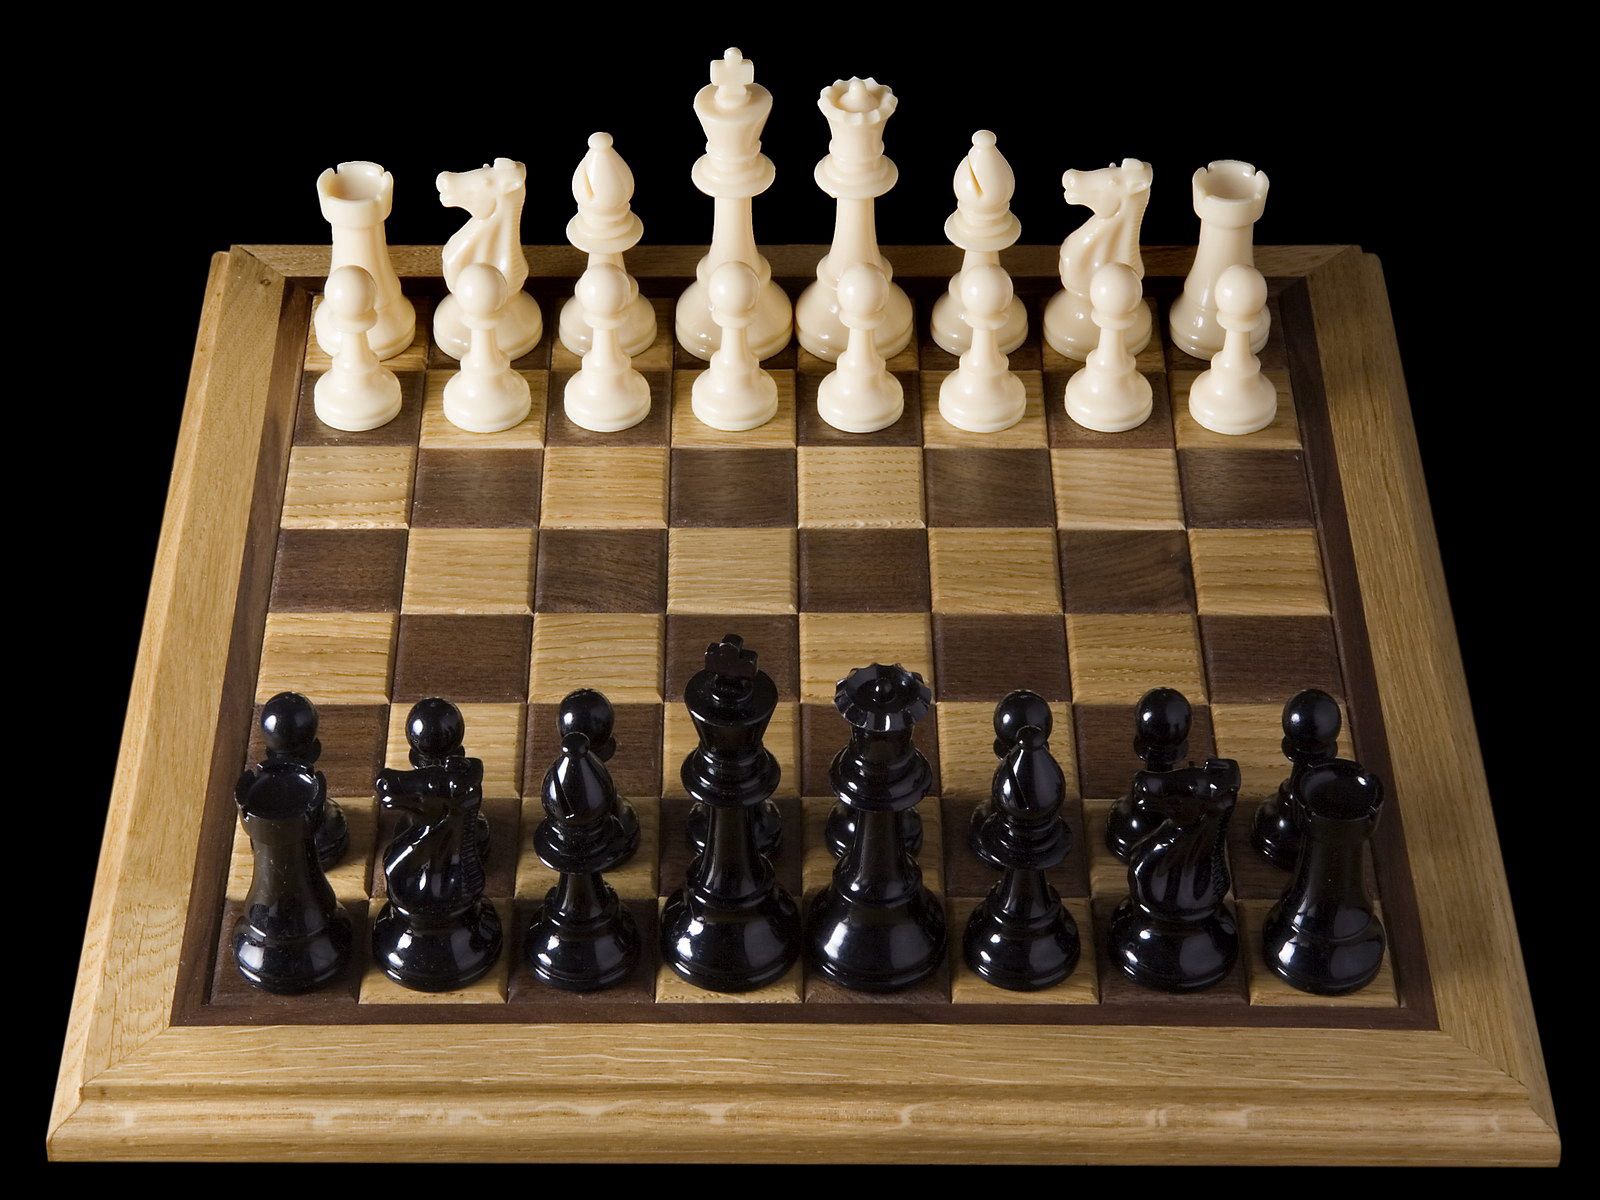 chess, consignment, sports, black, white, shapes, shape, game, board, party Full HD